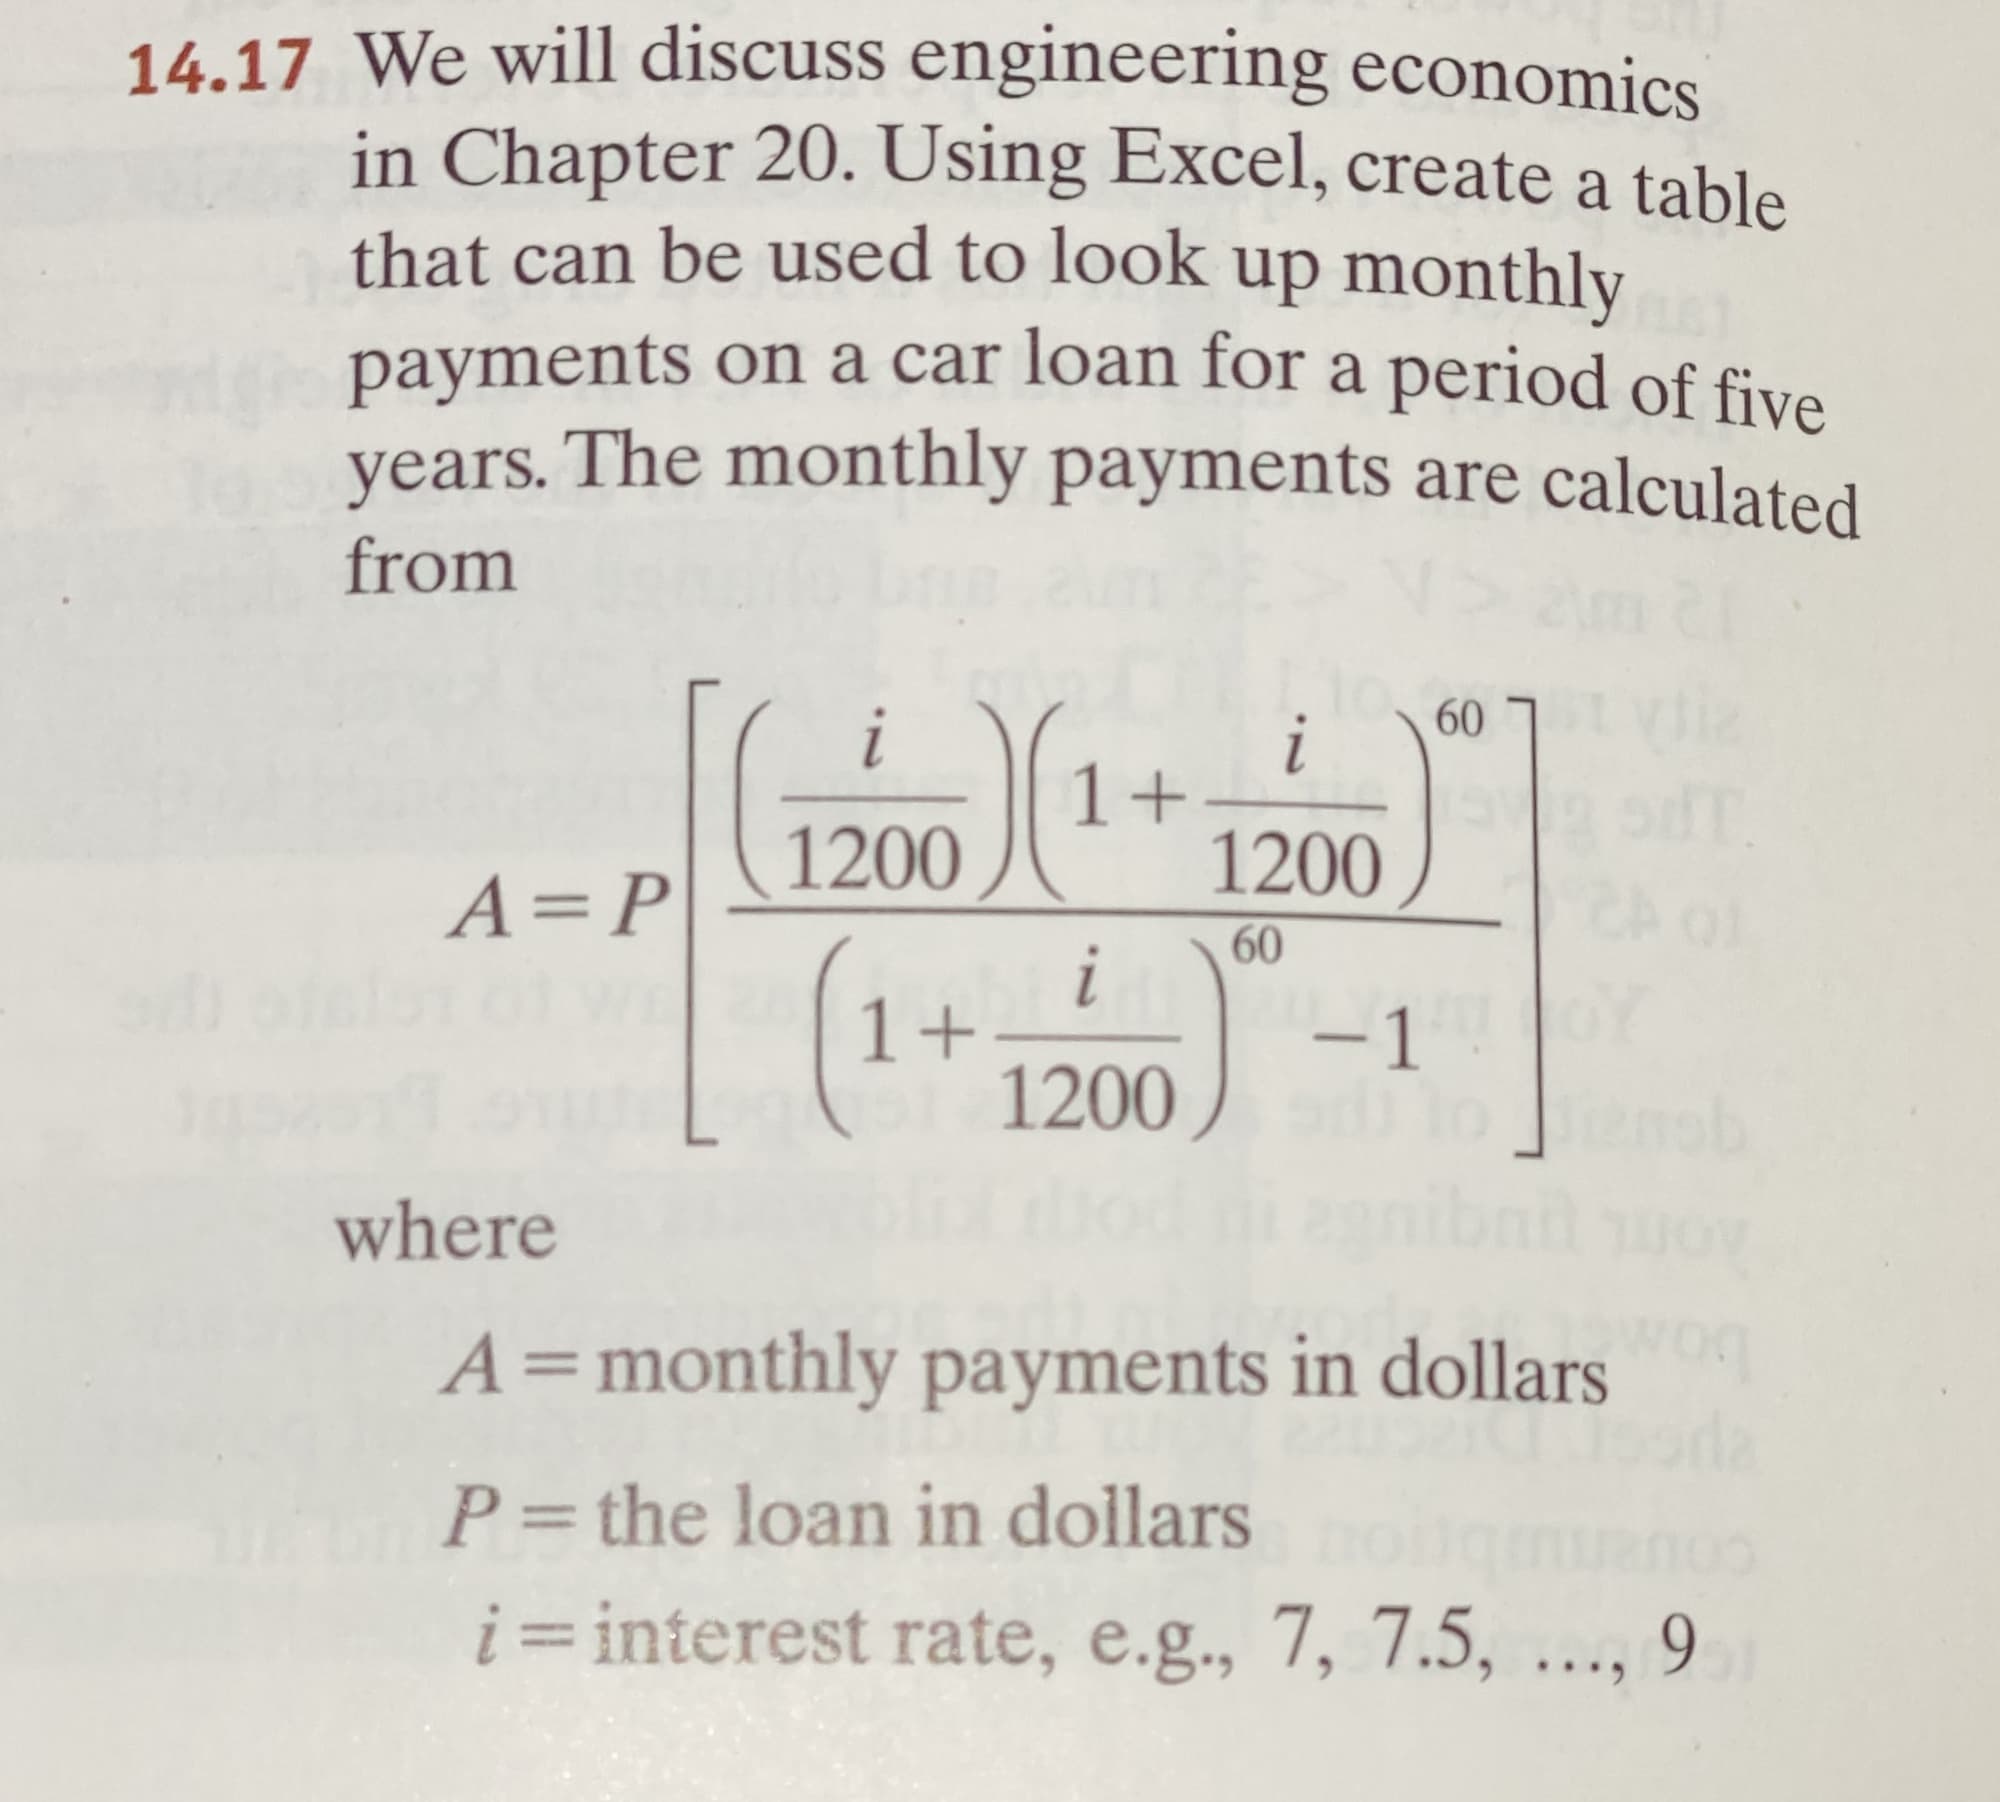 We will discuss engineering economics
in Chapter 20. Using Excel, create a table
that can be used to look up monthly
payments on a car loan for a period of five
vears. The monthly payments are calculated
from
i
607
i
1+
1200
1200
A=P
60
i
1+
1200
-1
oY
enob
od nibn o
where
A=monthly payments in dollars
P= the loan in dollars
i= interest rate, e.g., 7, 7.5, ..., 9
